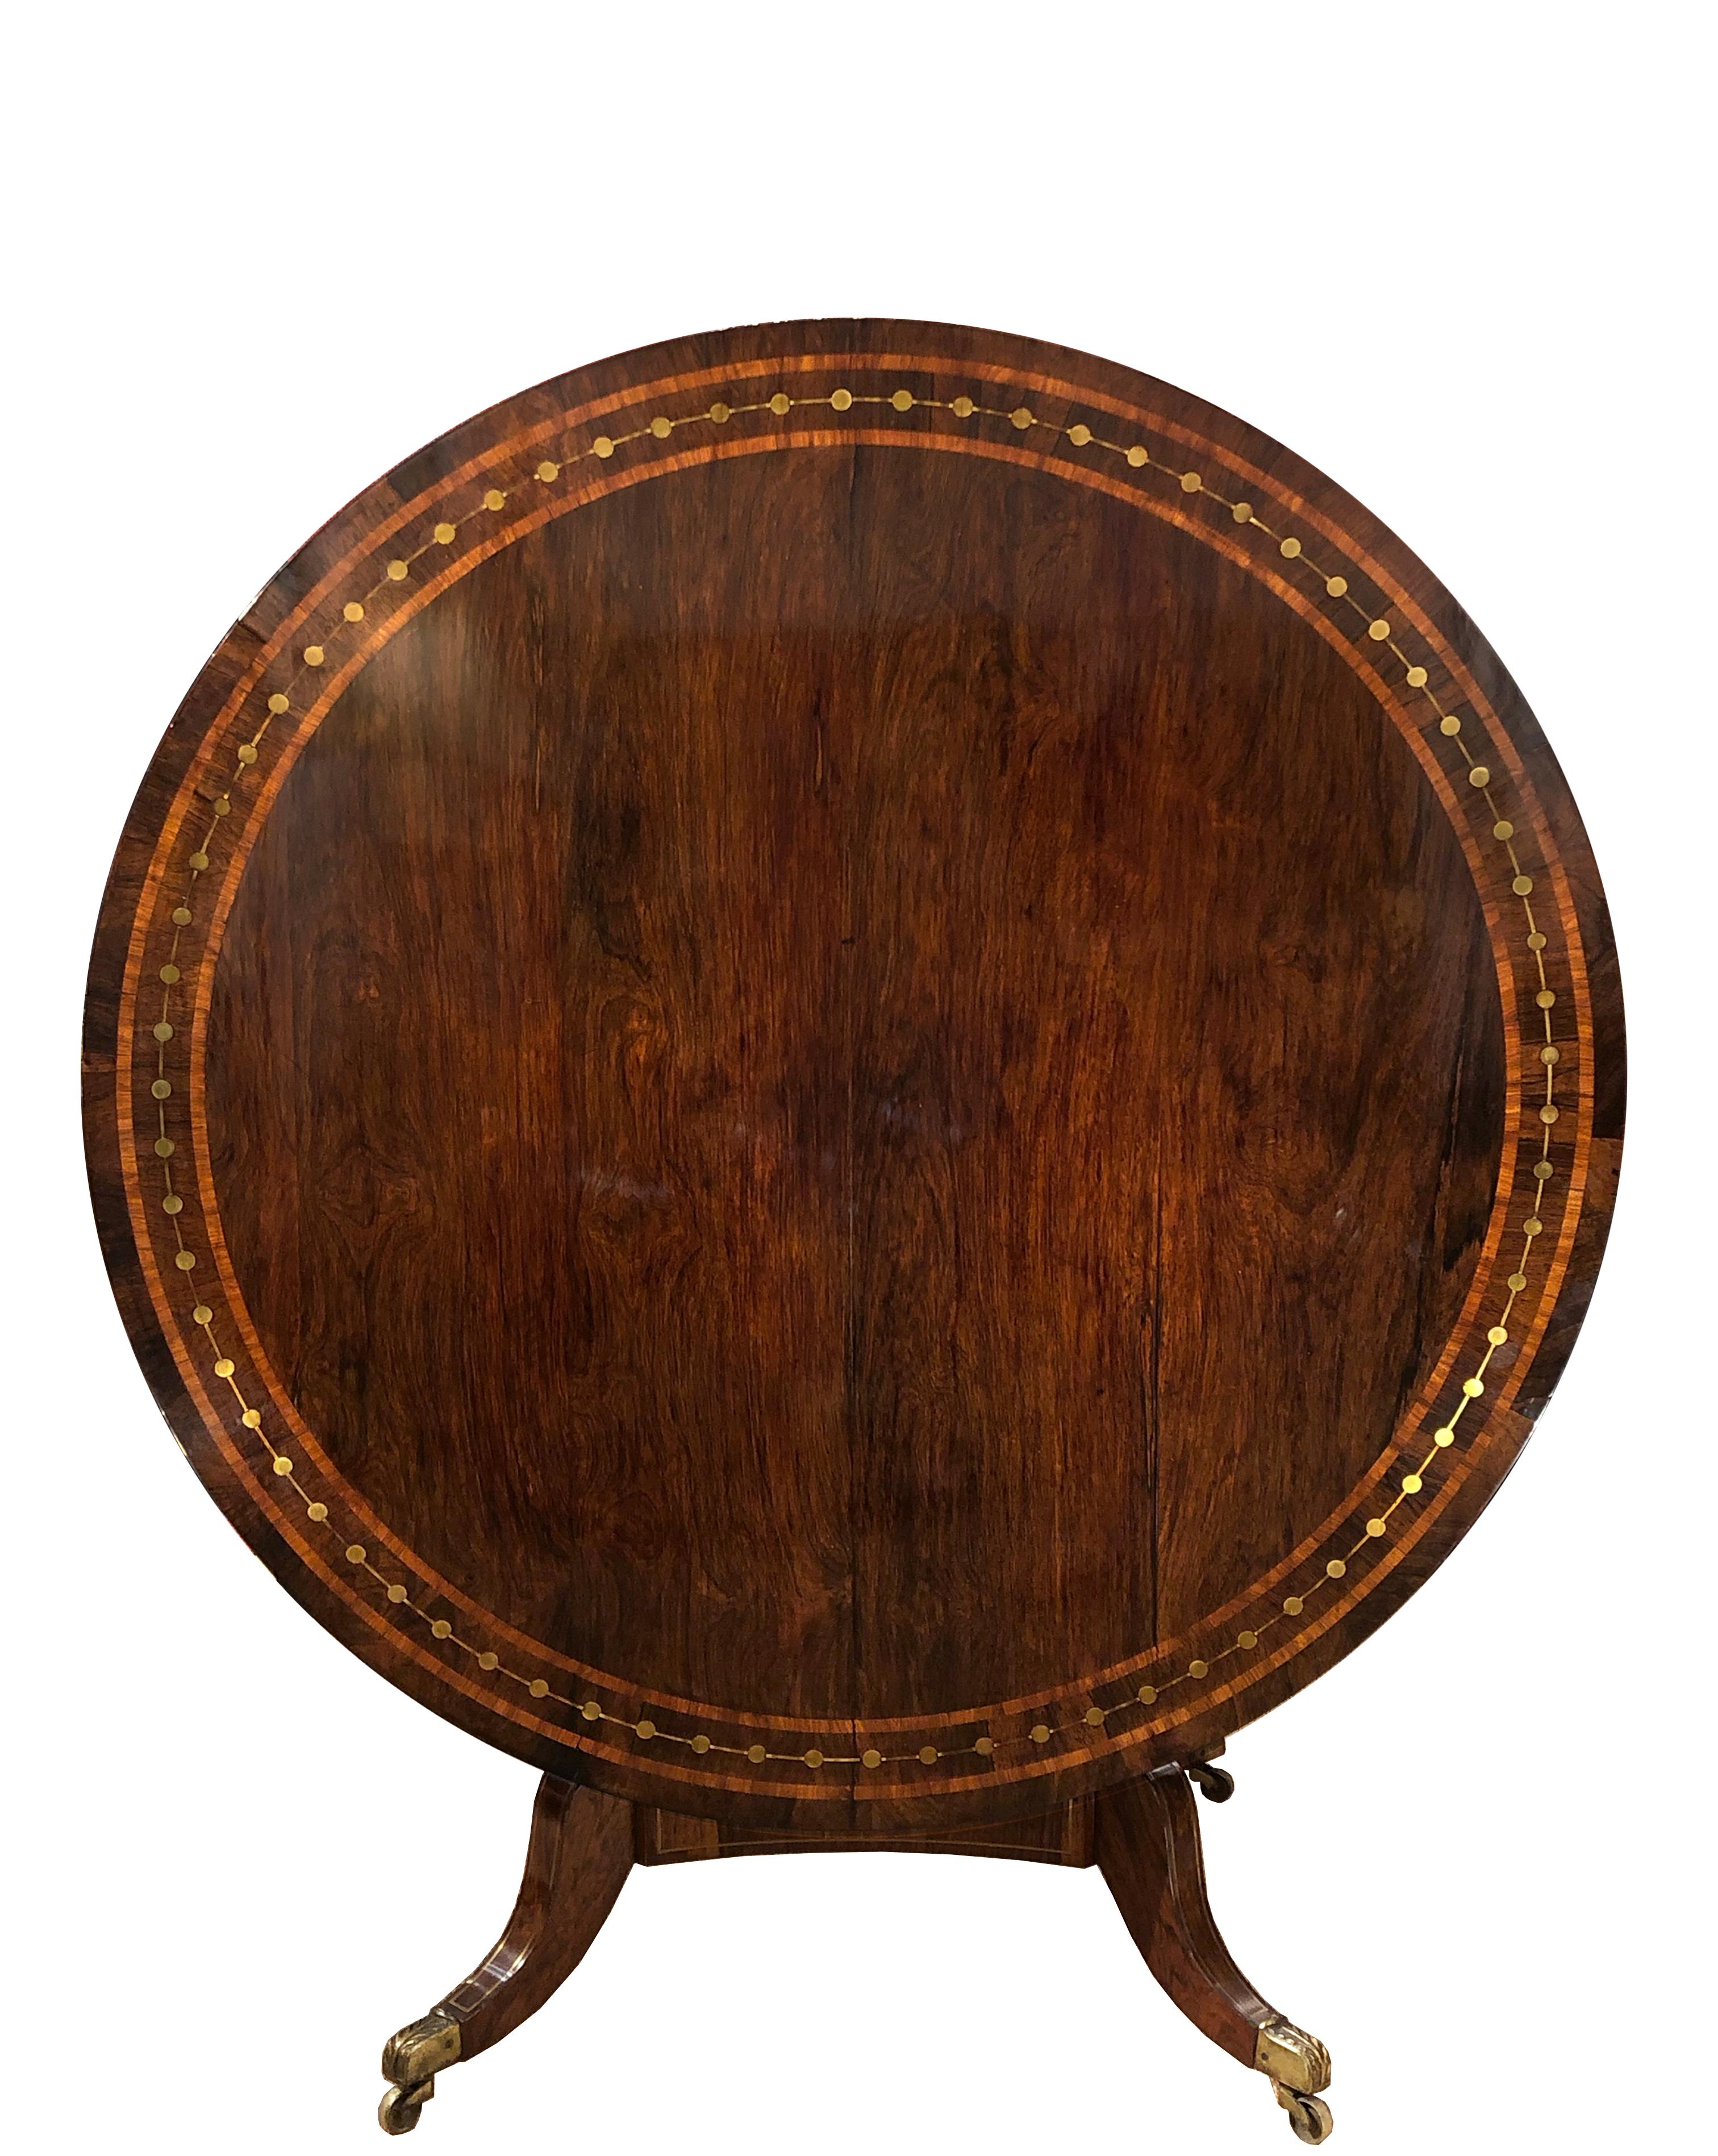 A Regency period rosewood tilt-top table
Rosewood veneer with satinwood banding to top; brass inlay to the top, apron, base and legs, with its original brass casters. For use as dining, breakfast, games, or center table.
England, circa 1820.
  